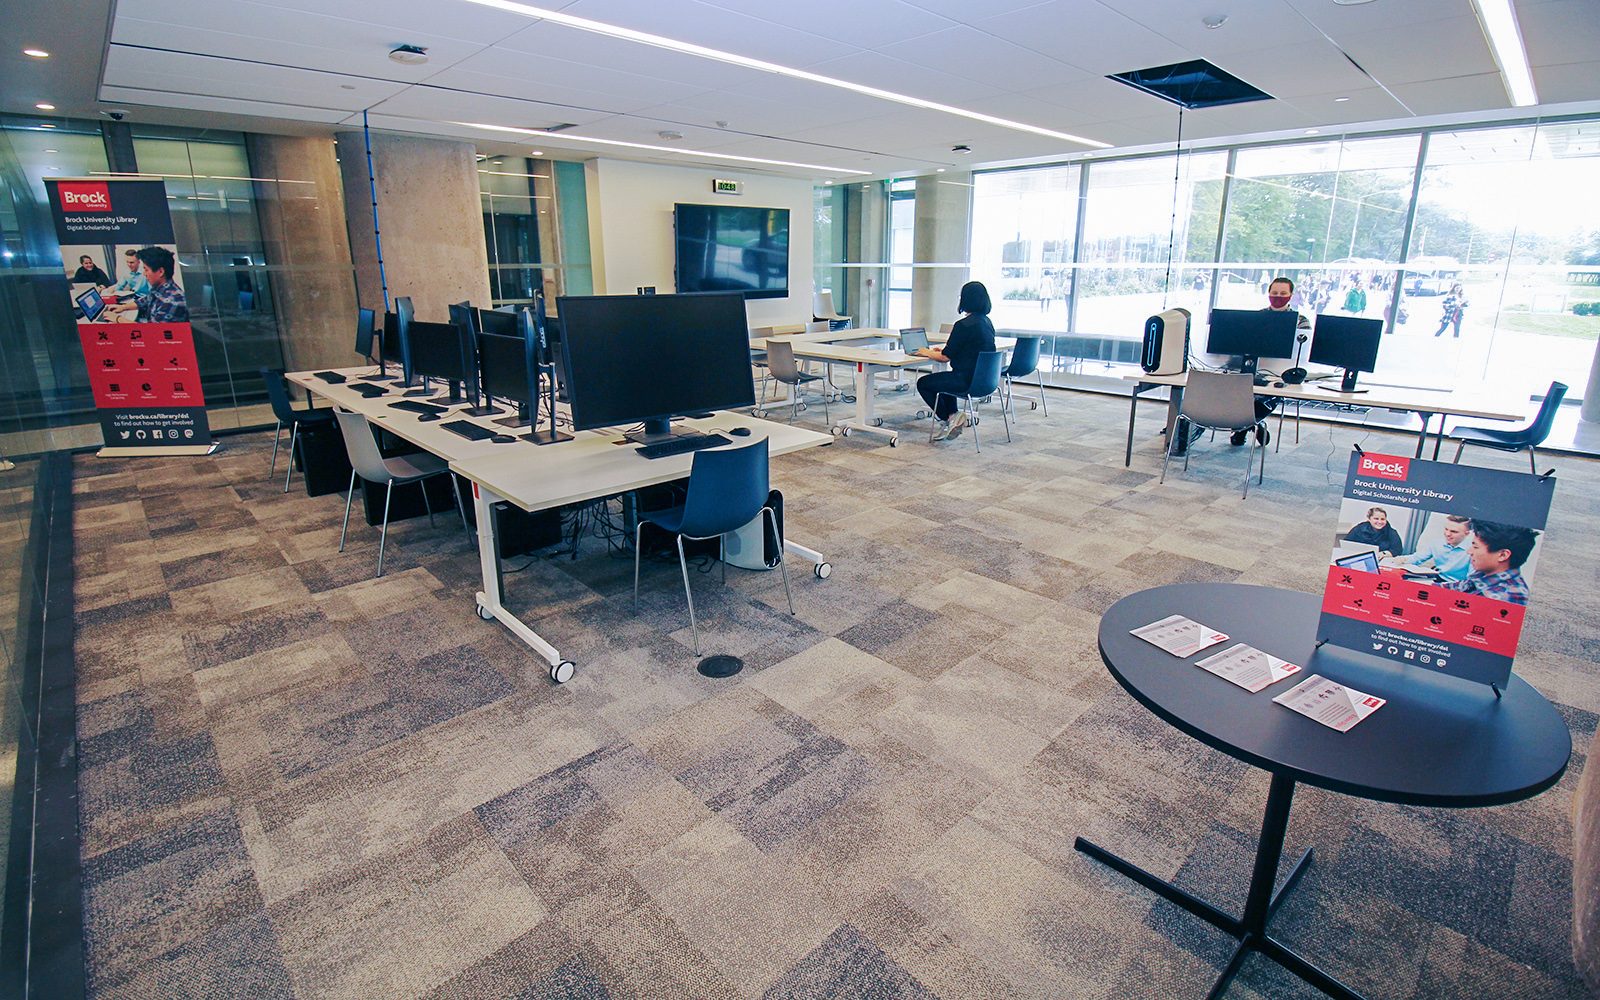 A large glass enclosed room contains several computers on white tables and a large digital screen on one wall. Two people sit at tables: one uses a laptop, the other uses one of the desktop computers.